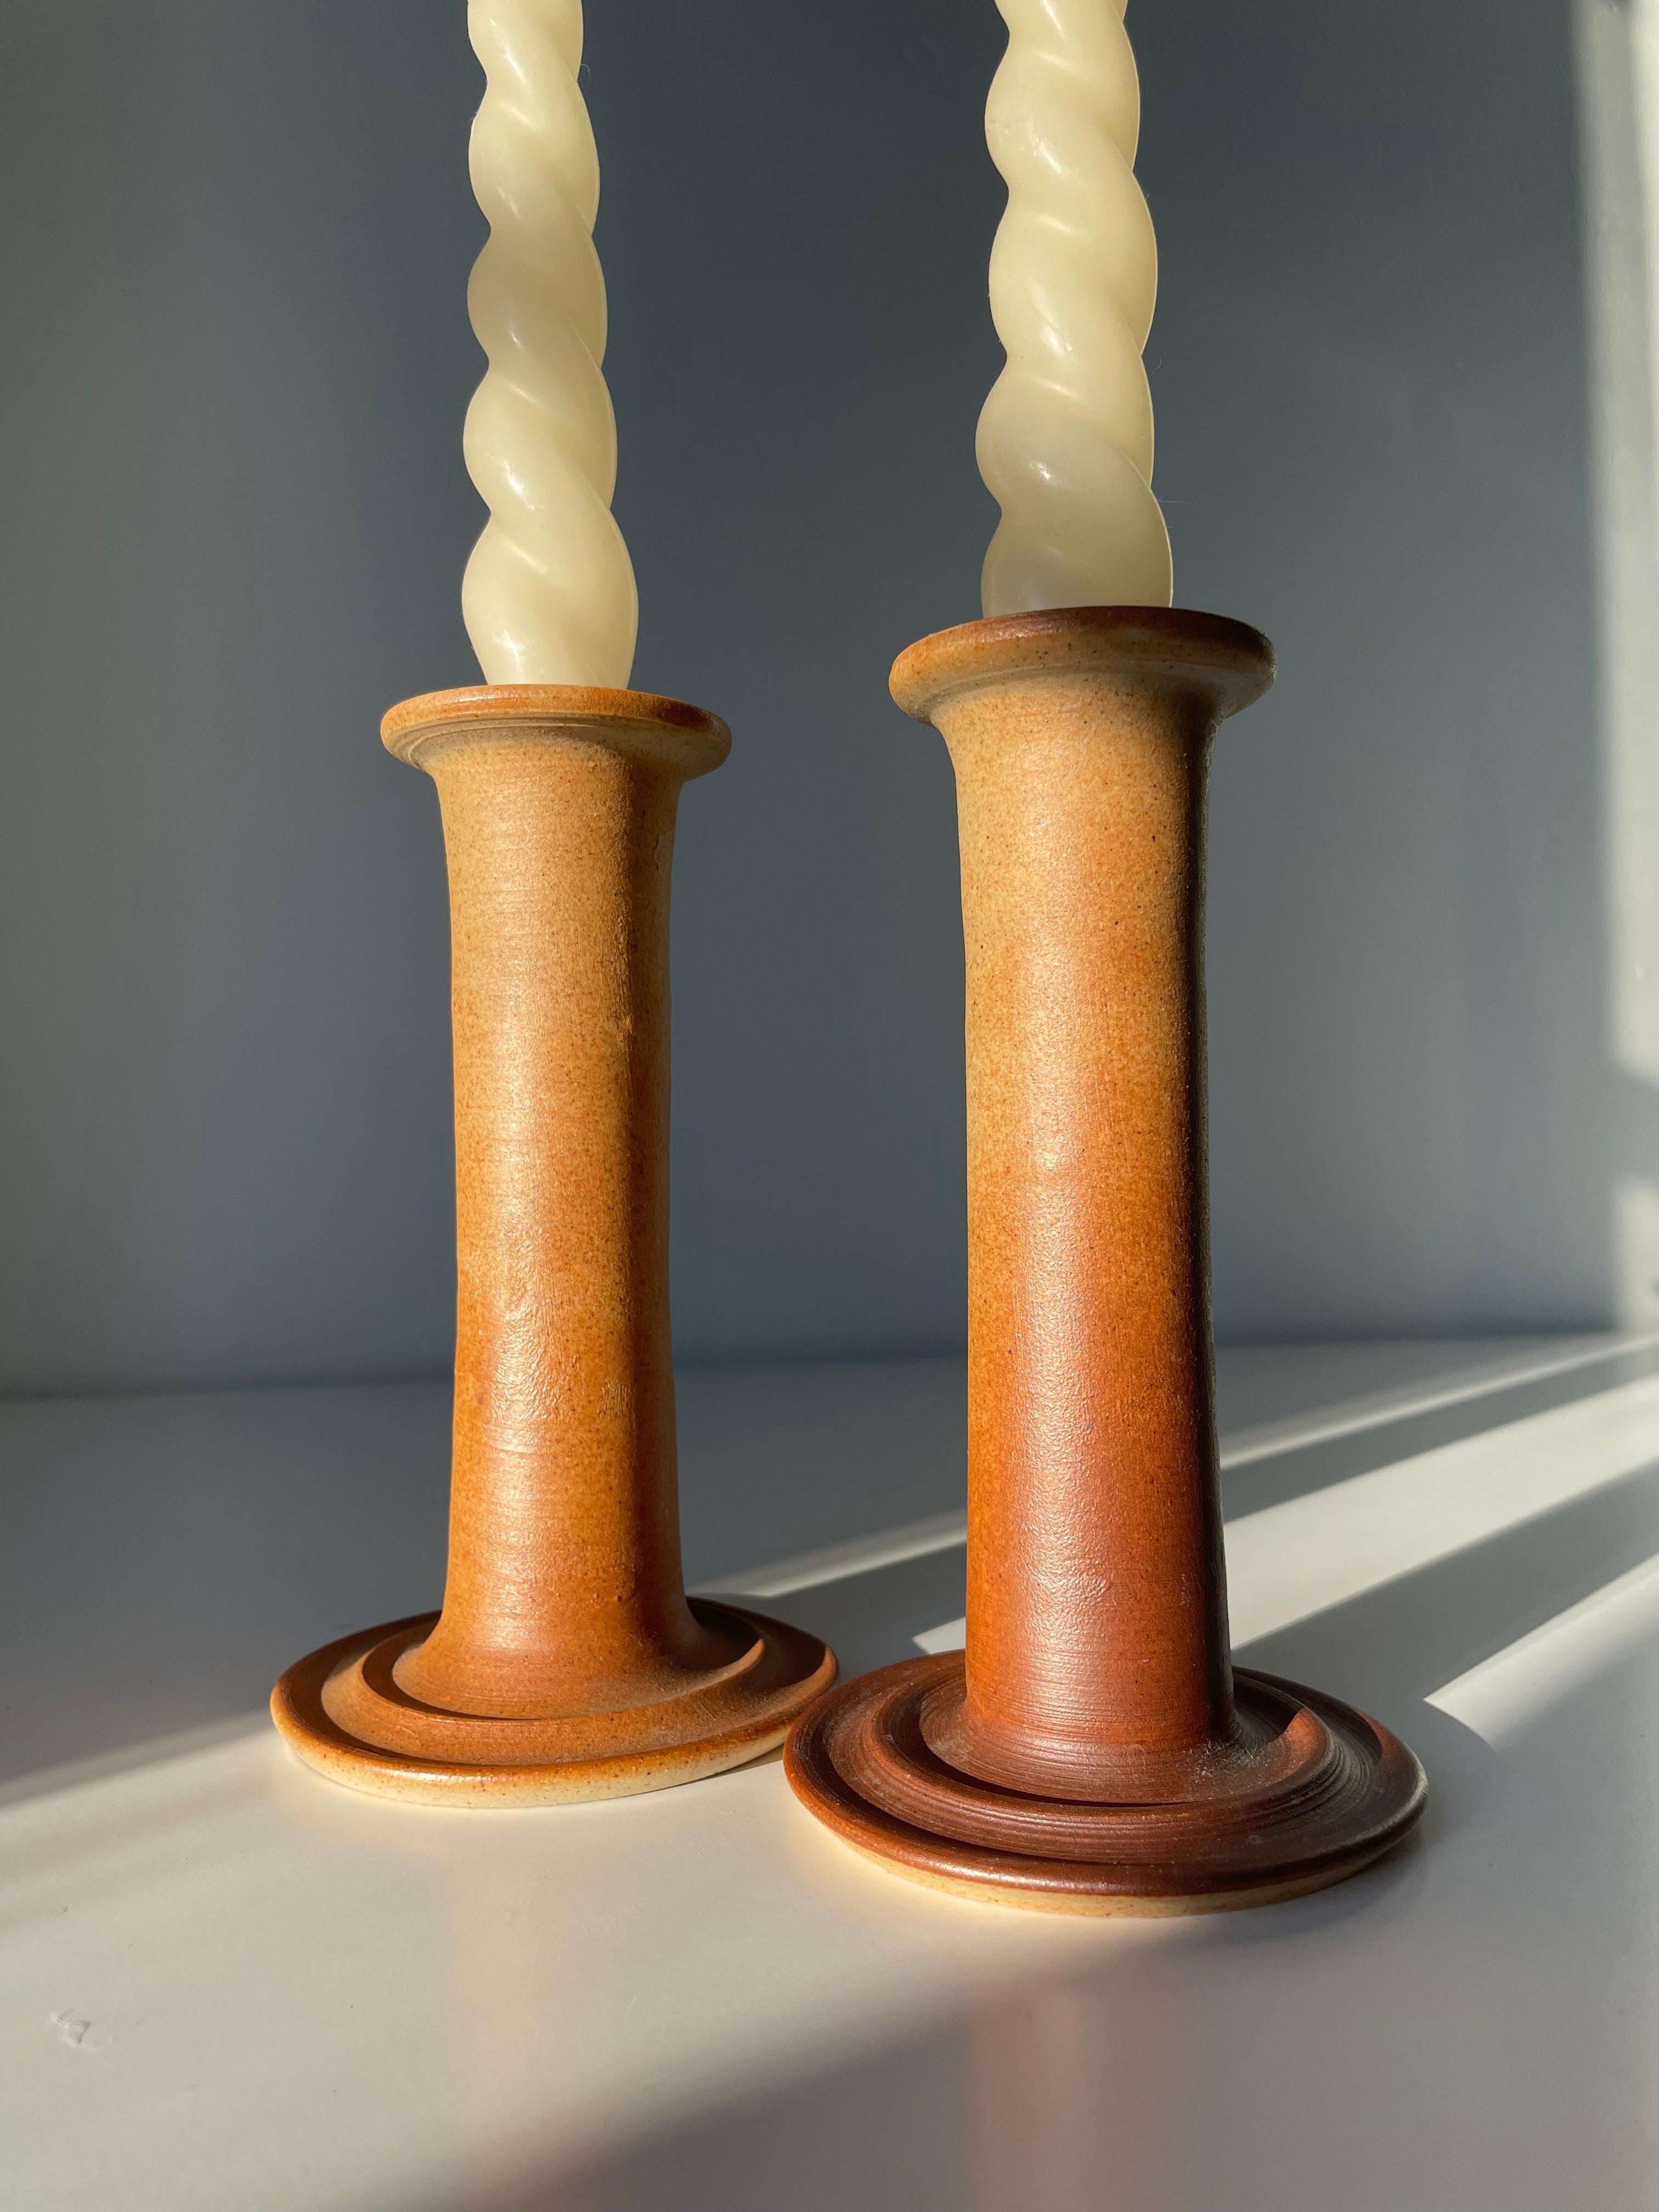 Pair of J. Packness Tawny Ceramic Candle Sticks, 1970s For Sale 1